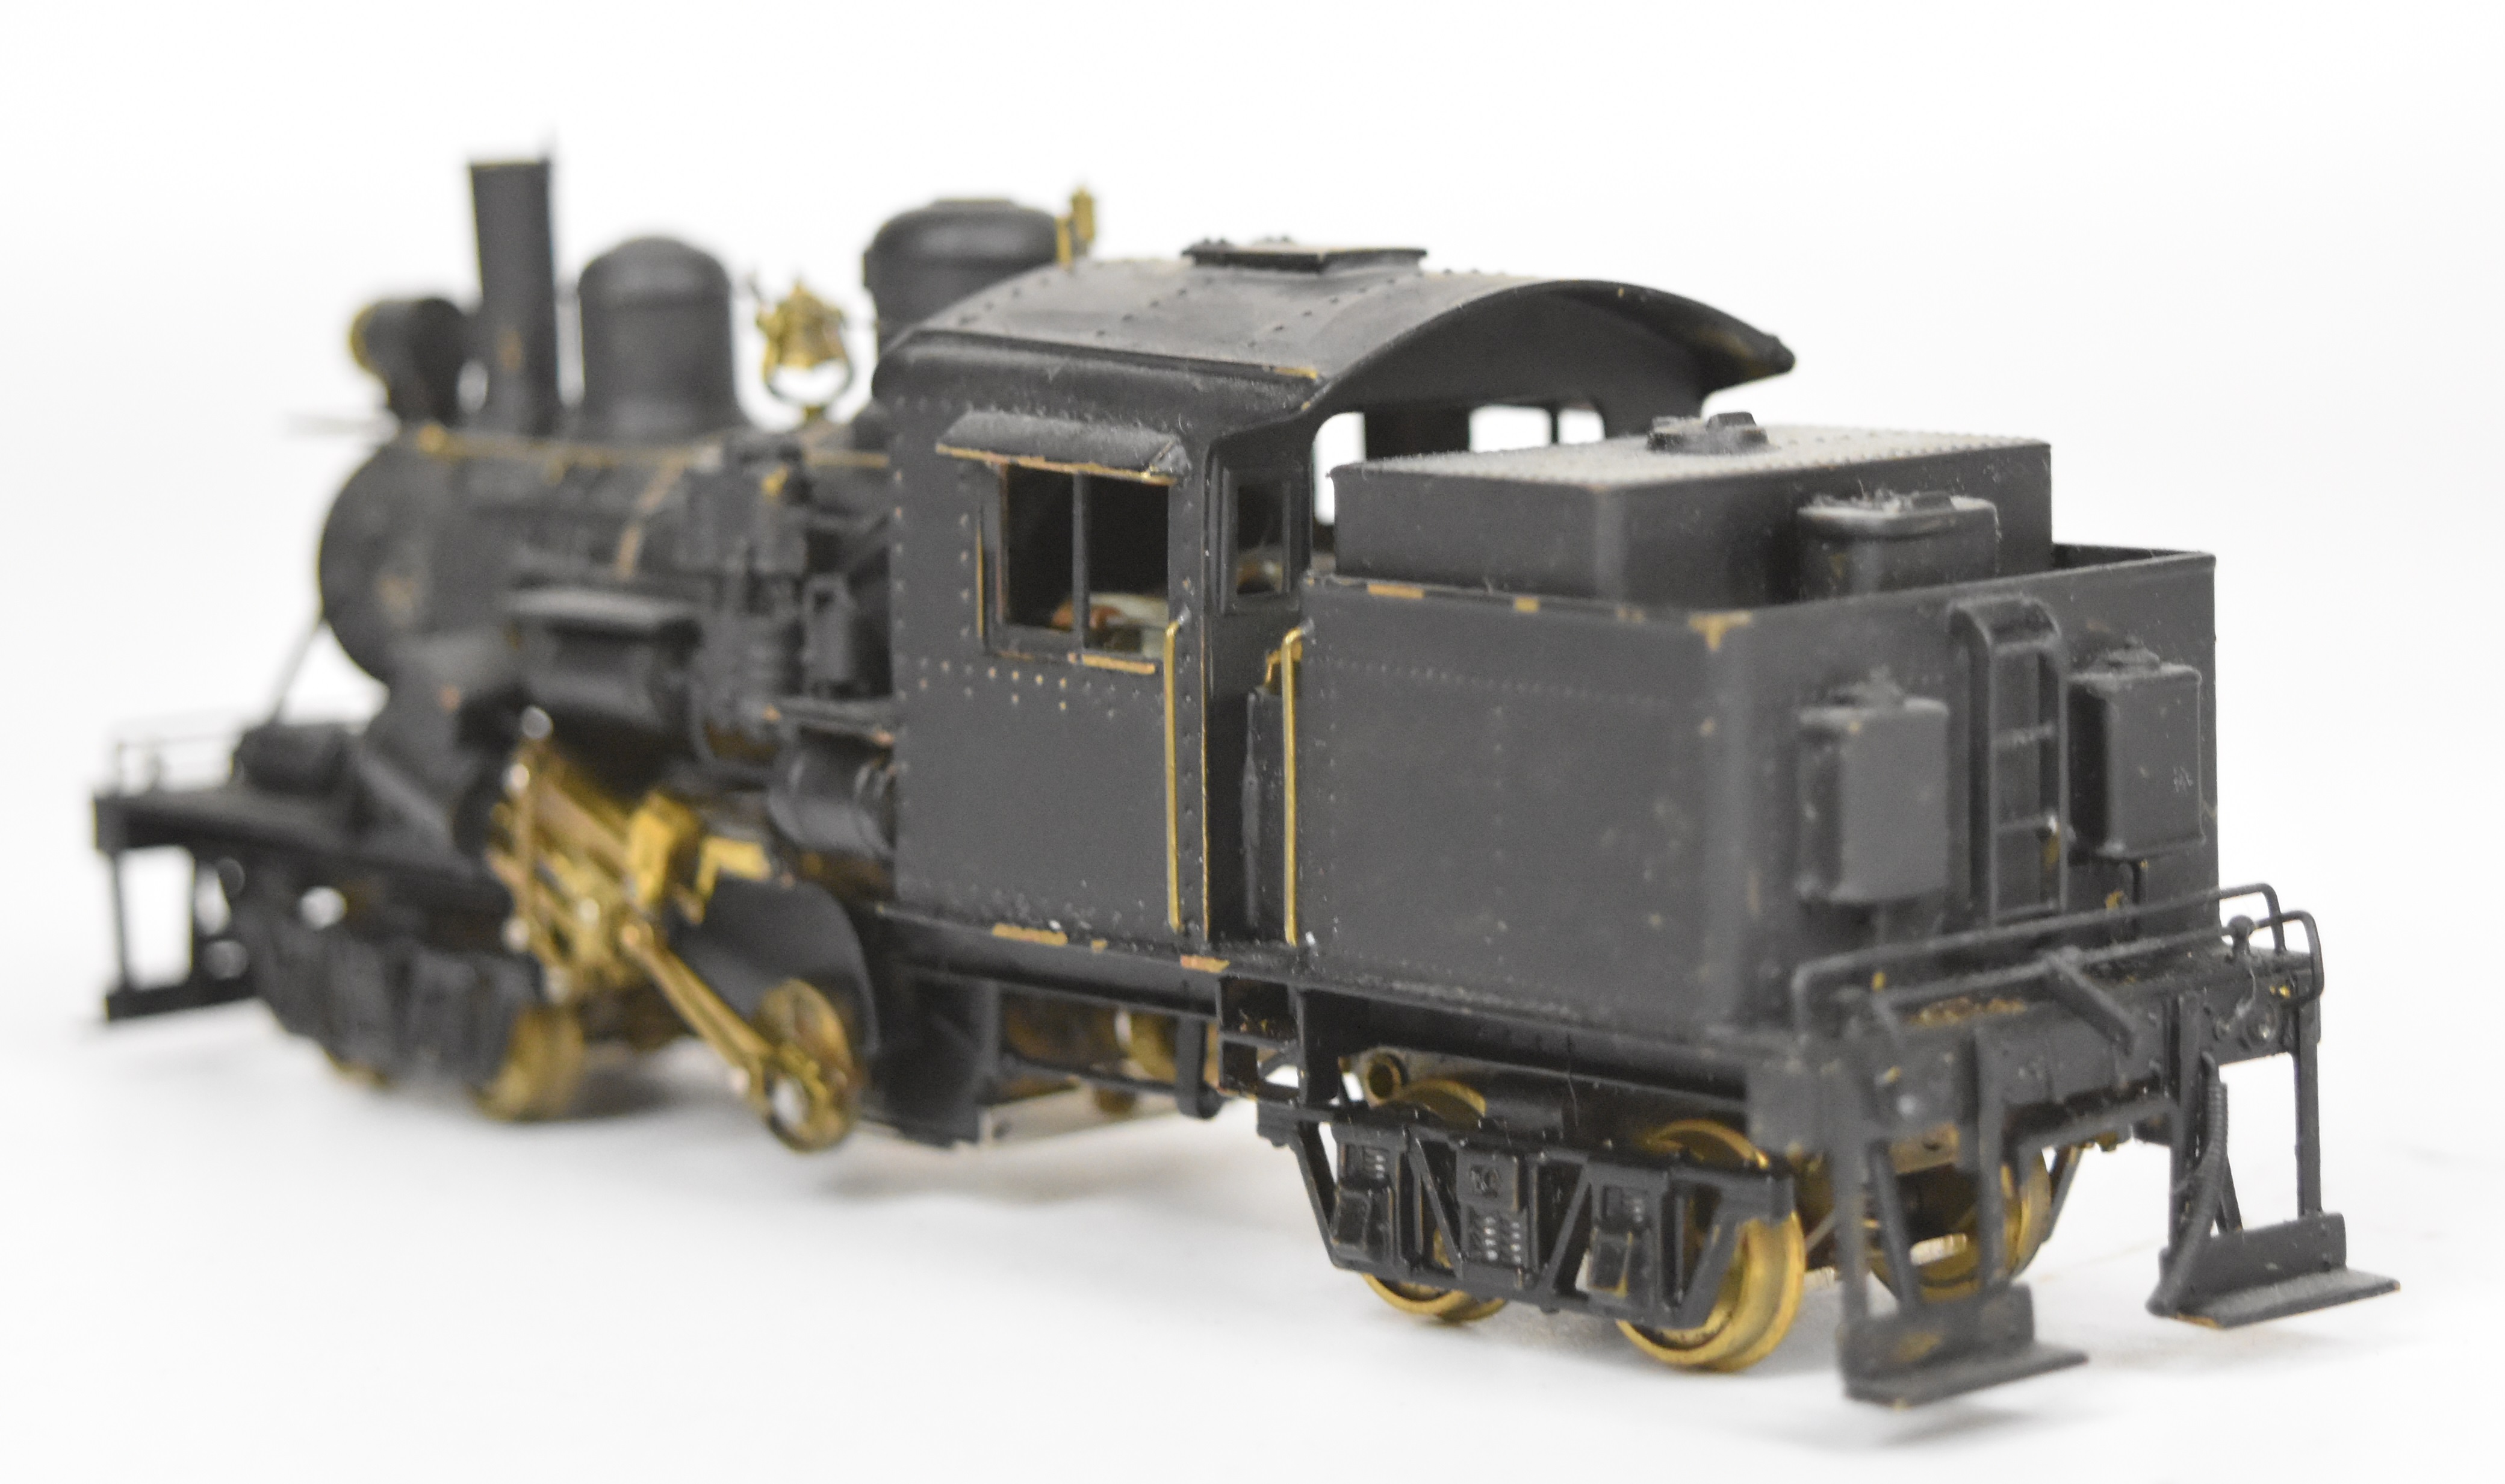 United Scale Models H0 gauge brass 'Climax' geared locomotive, in original box, made in Japan. - Image 3 of 5